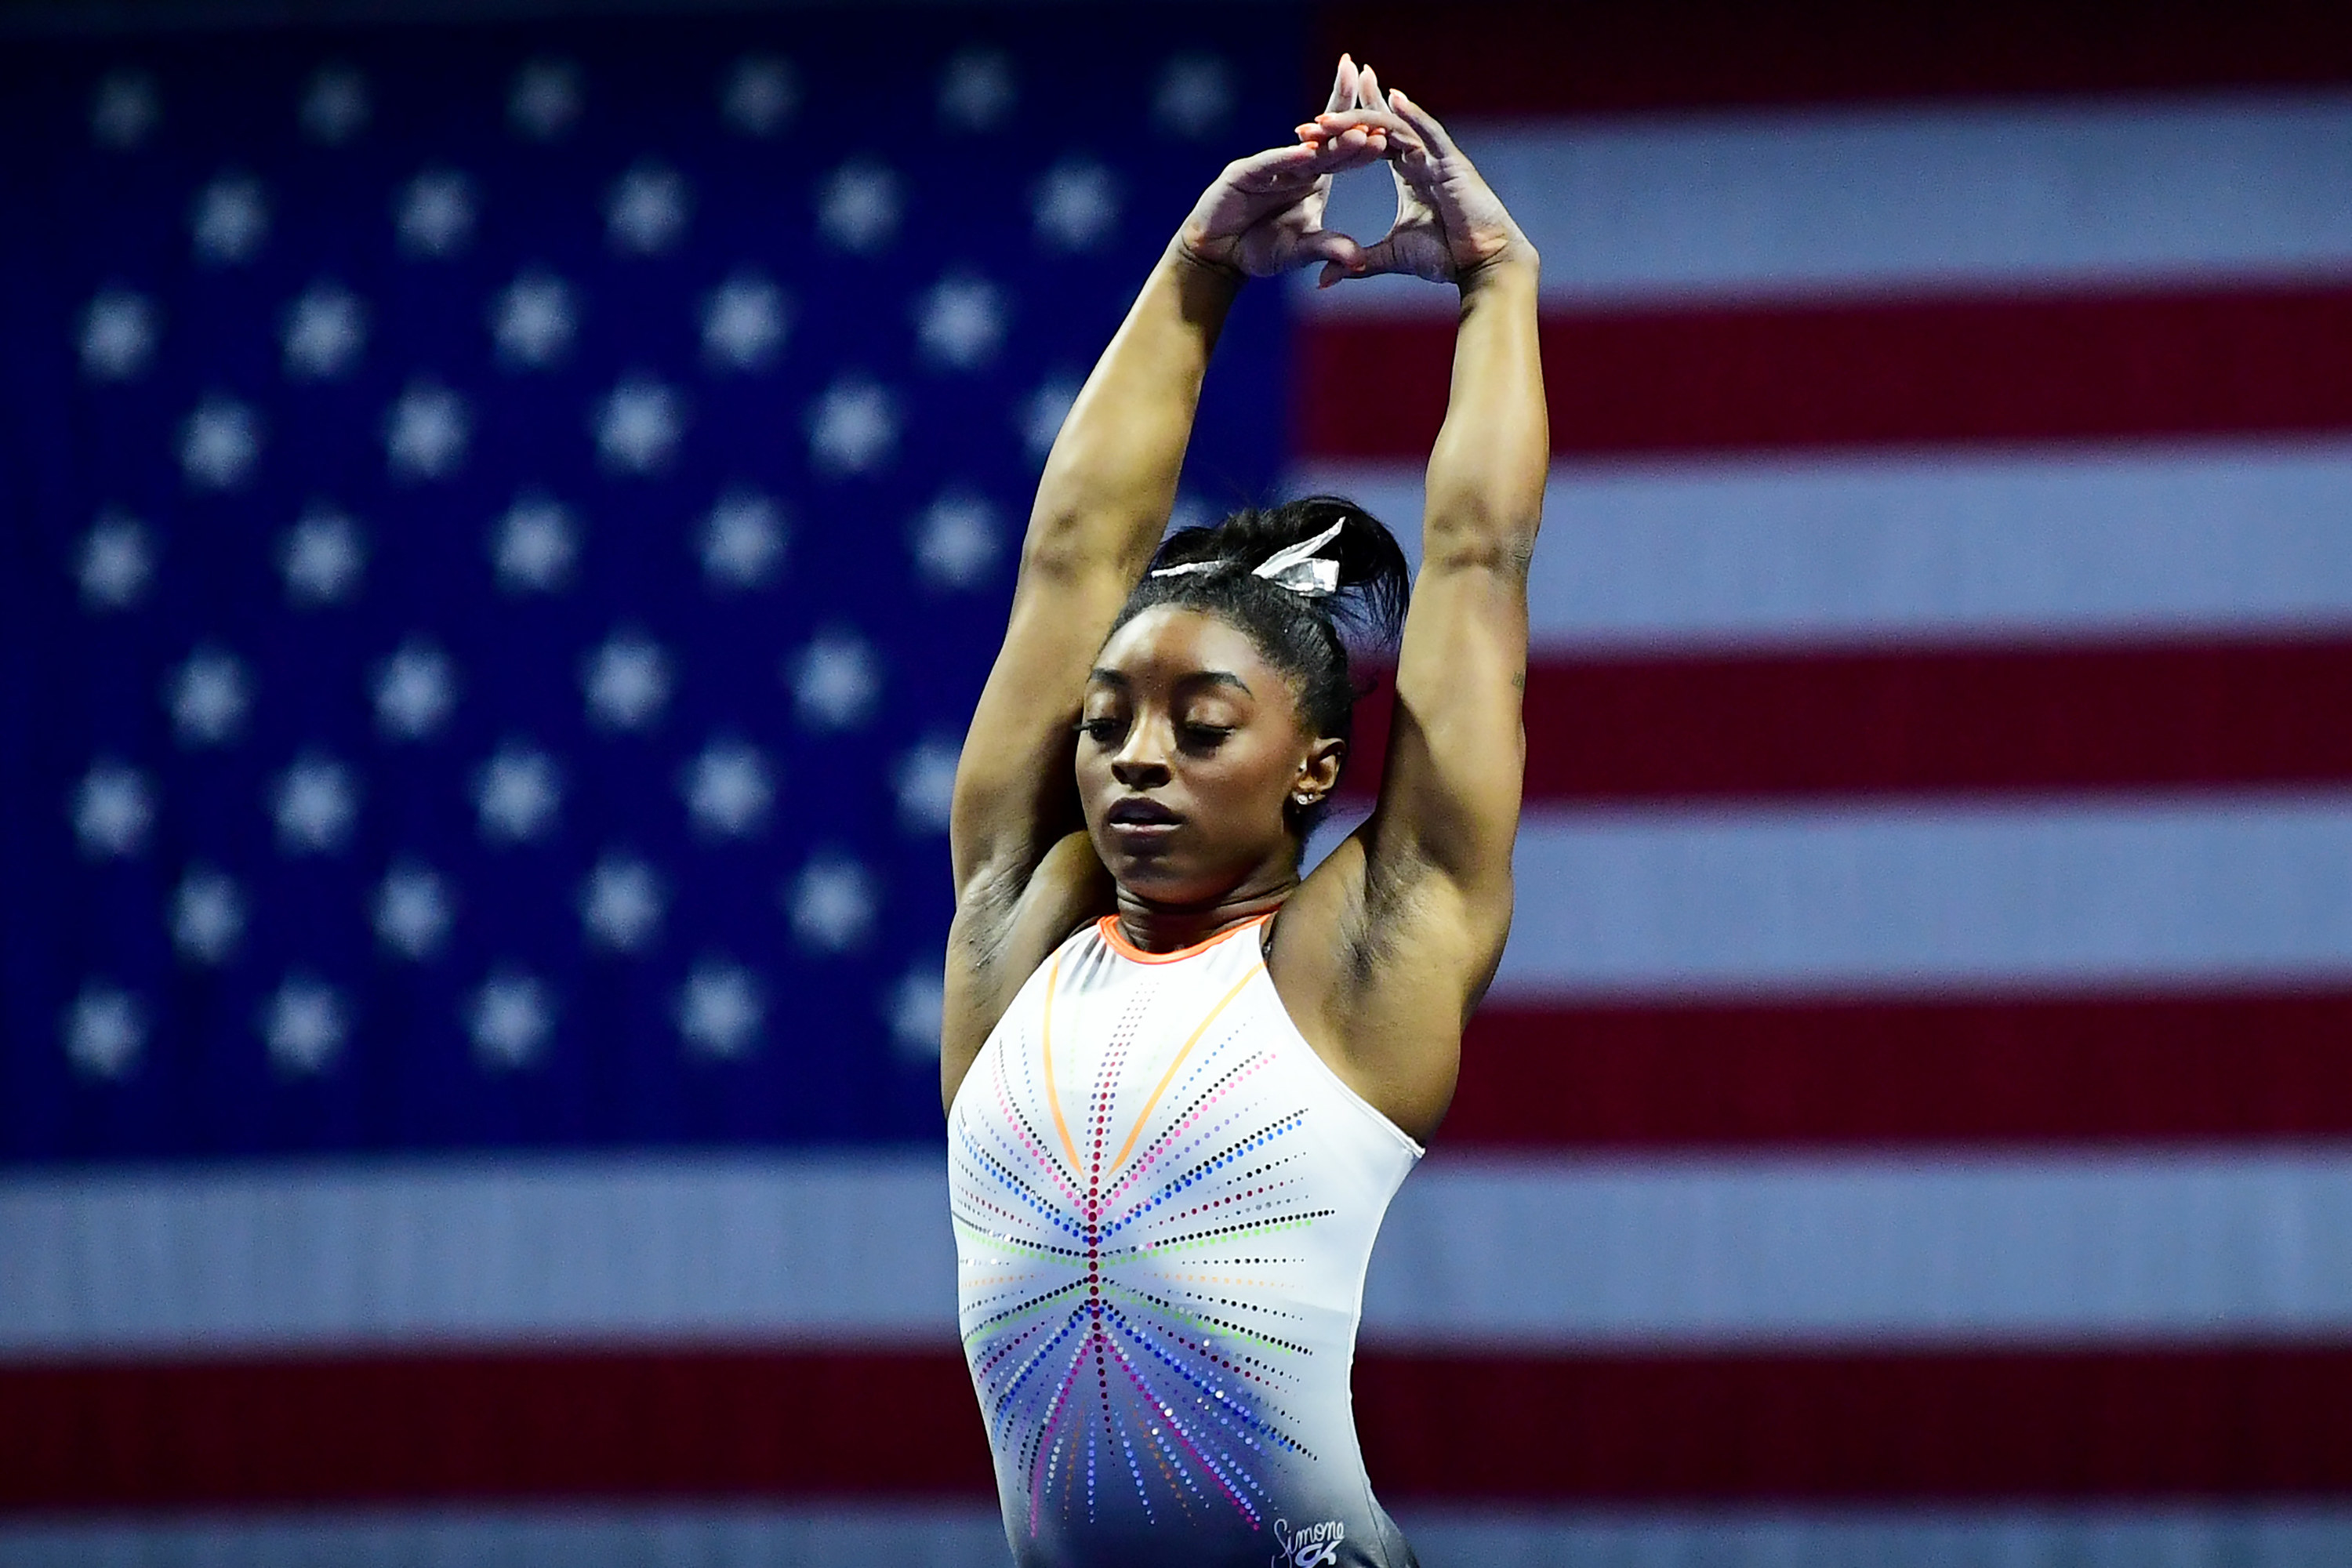 Simone Biles poses in front of the American flag